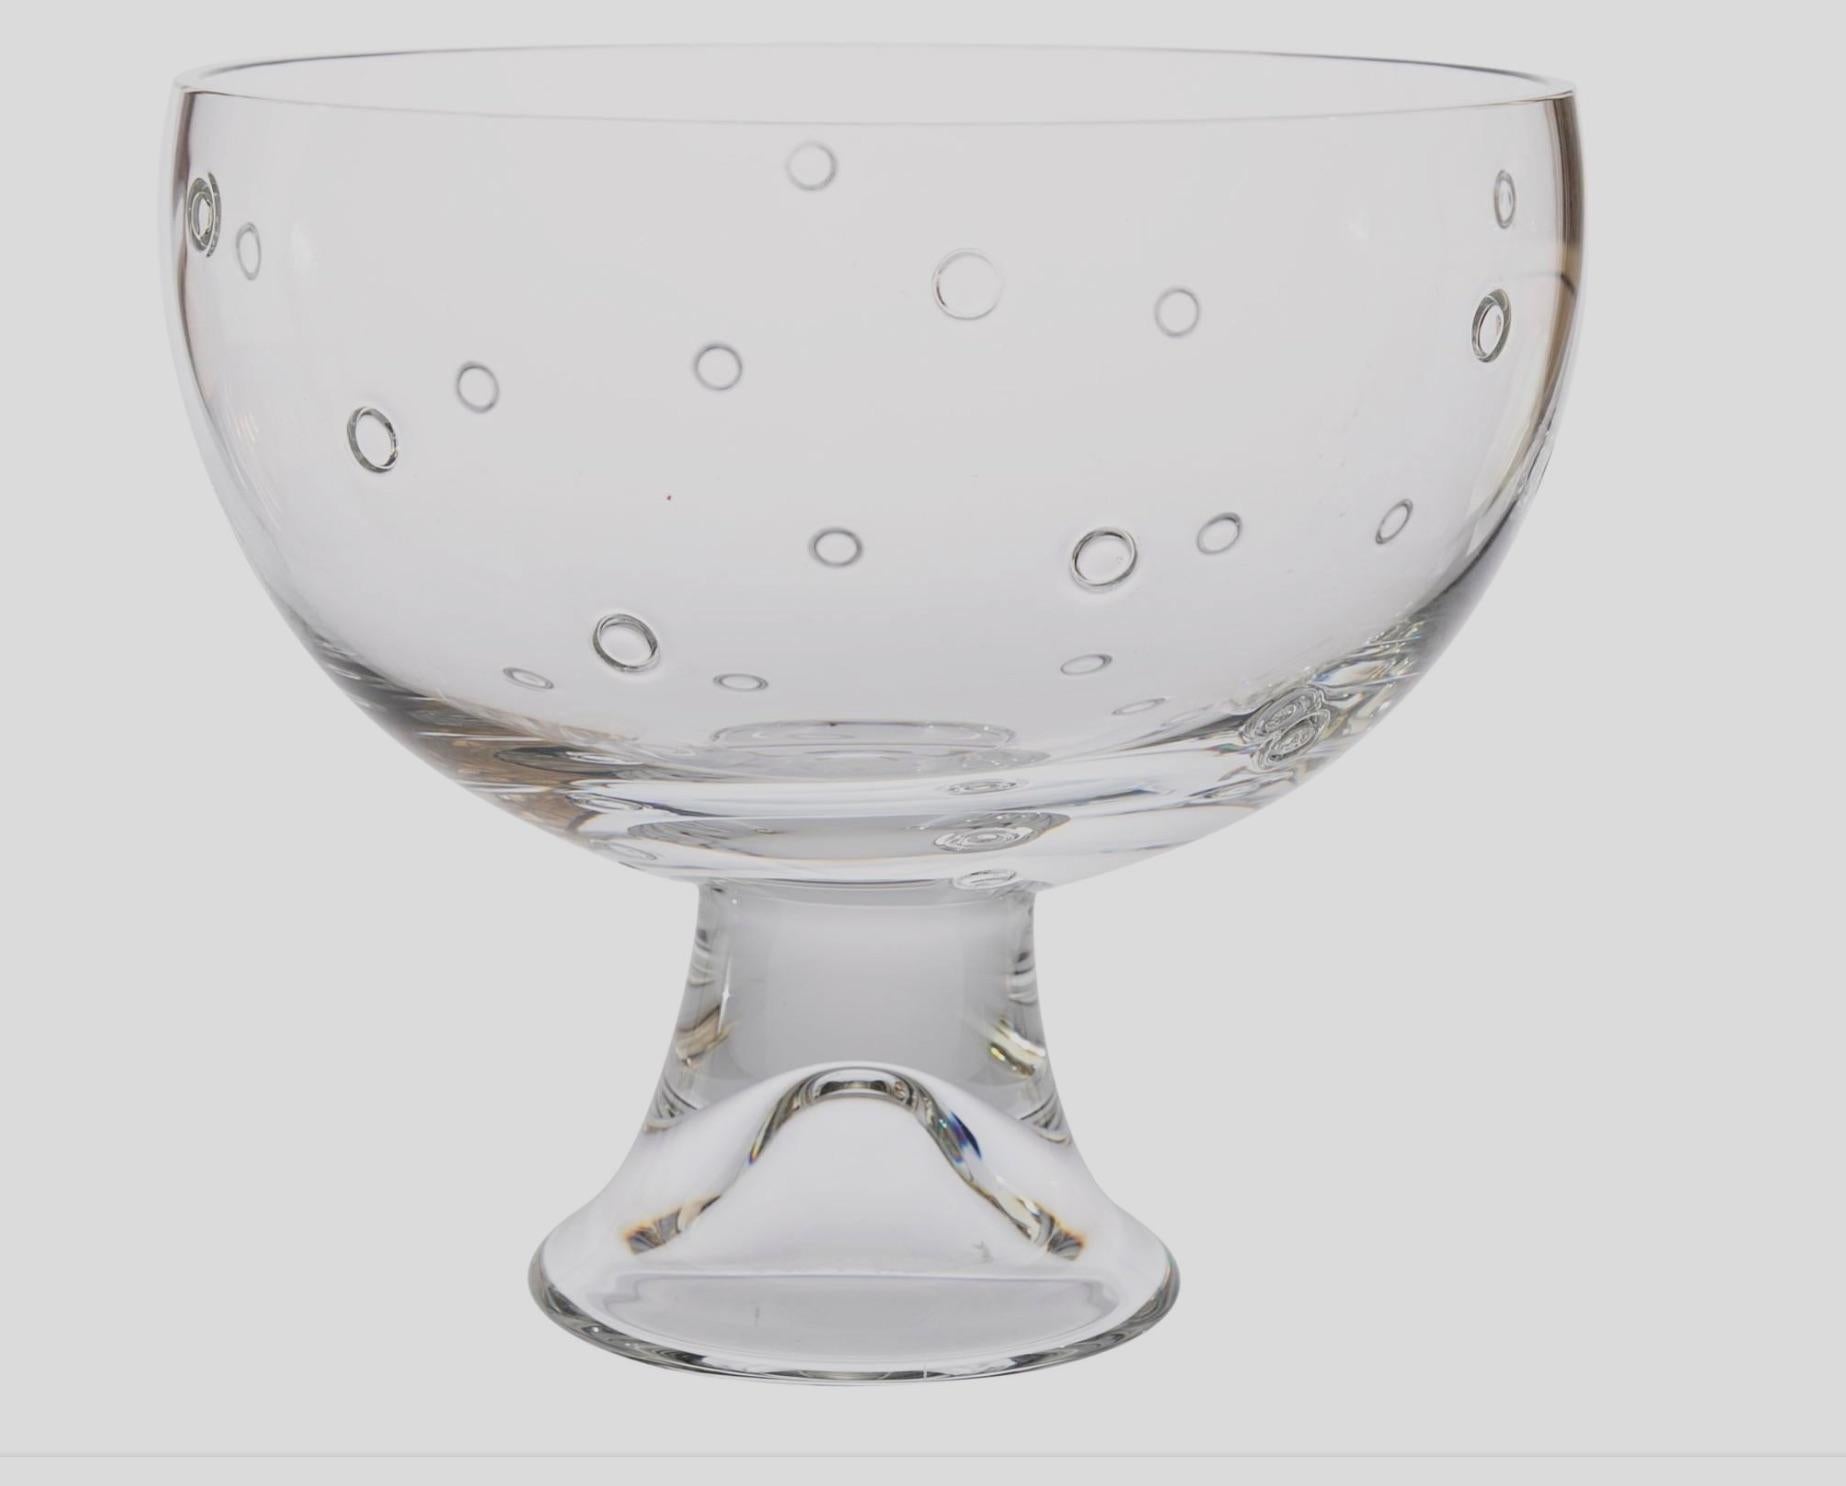 A modern magnificent highly rare beautifully detailed large Steuben footed bowl or punch bowl with raised deeply engraved floating bubbles throughout. Designed by Joel Smith for the legendary Steuben glassworks in New York. Signed Steuben
pattern